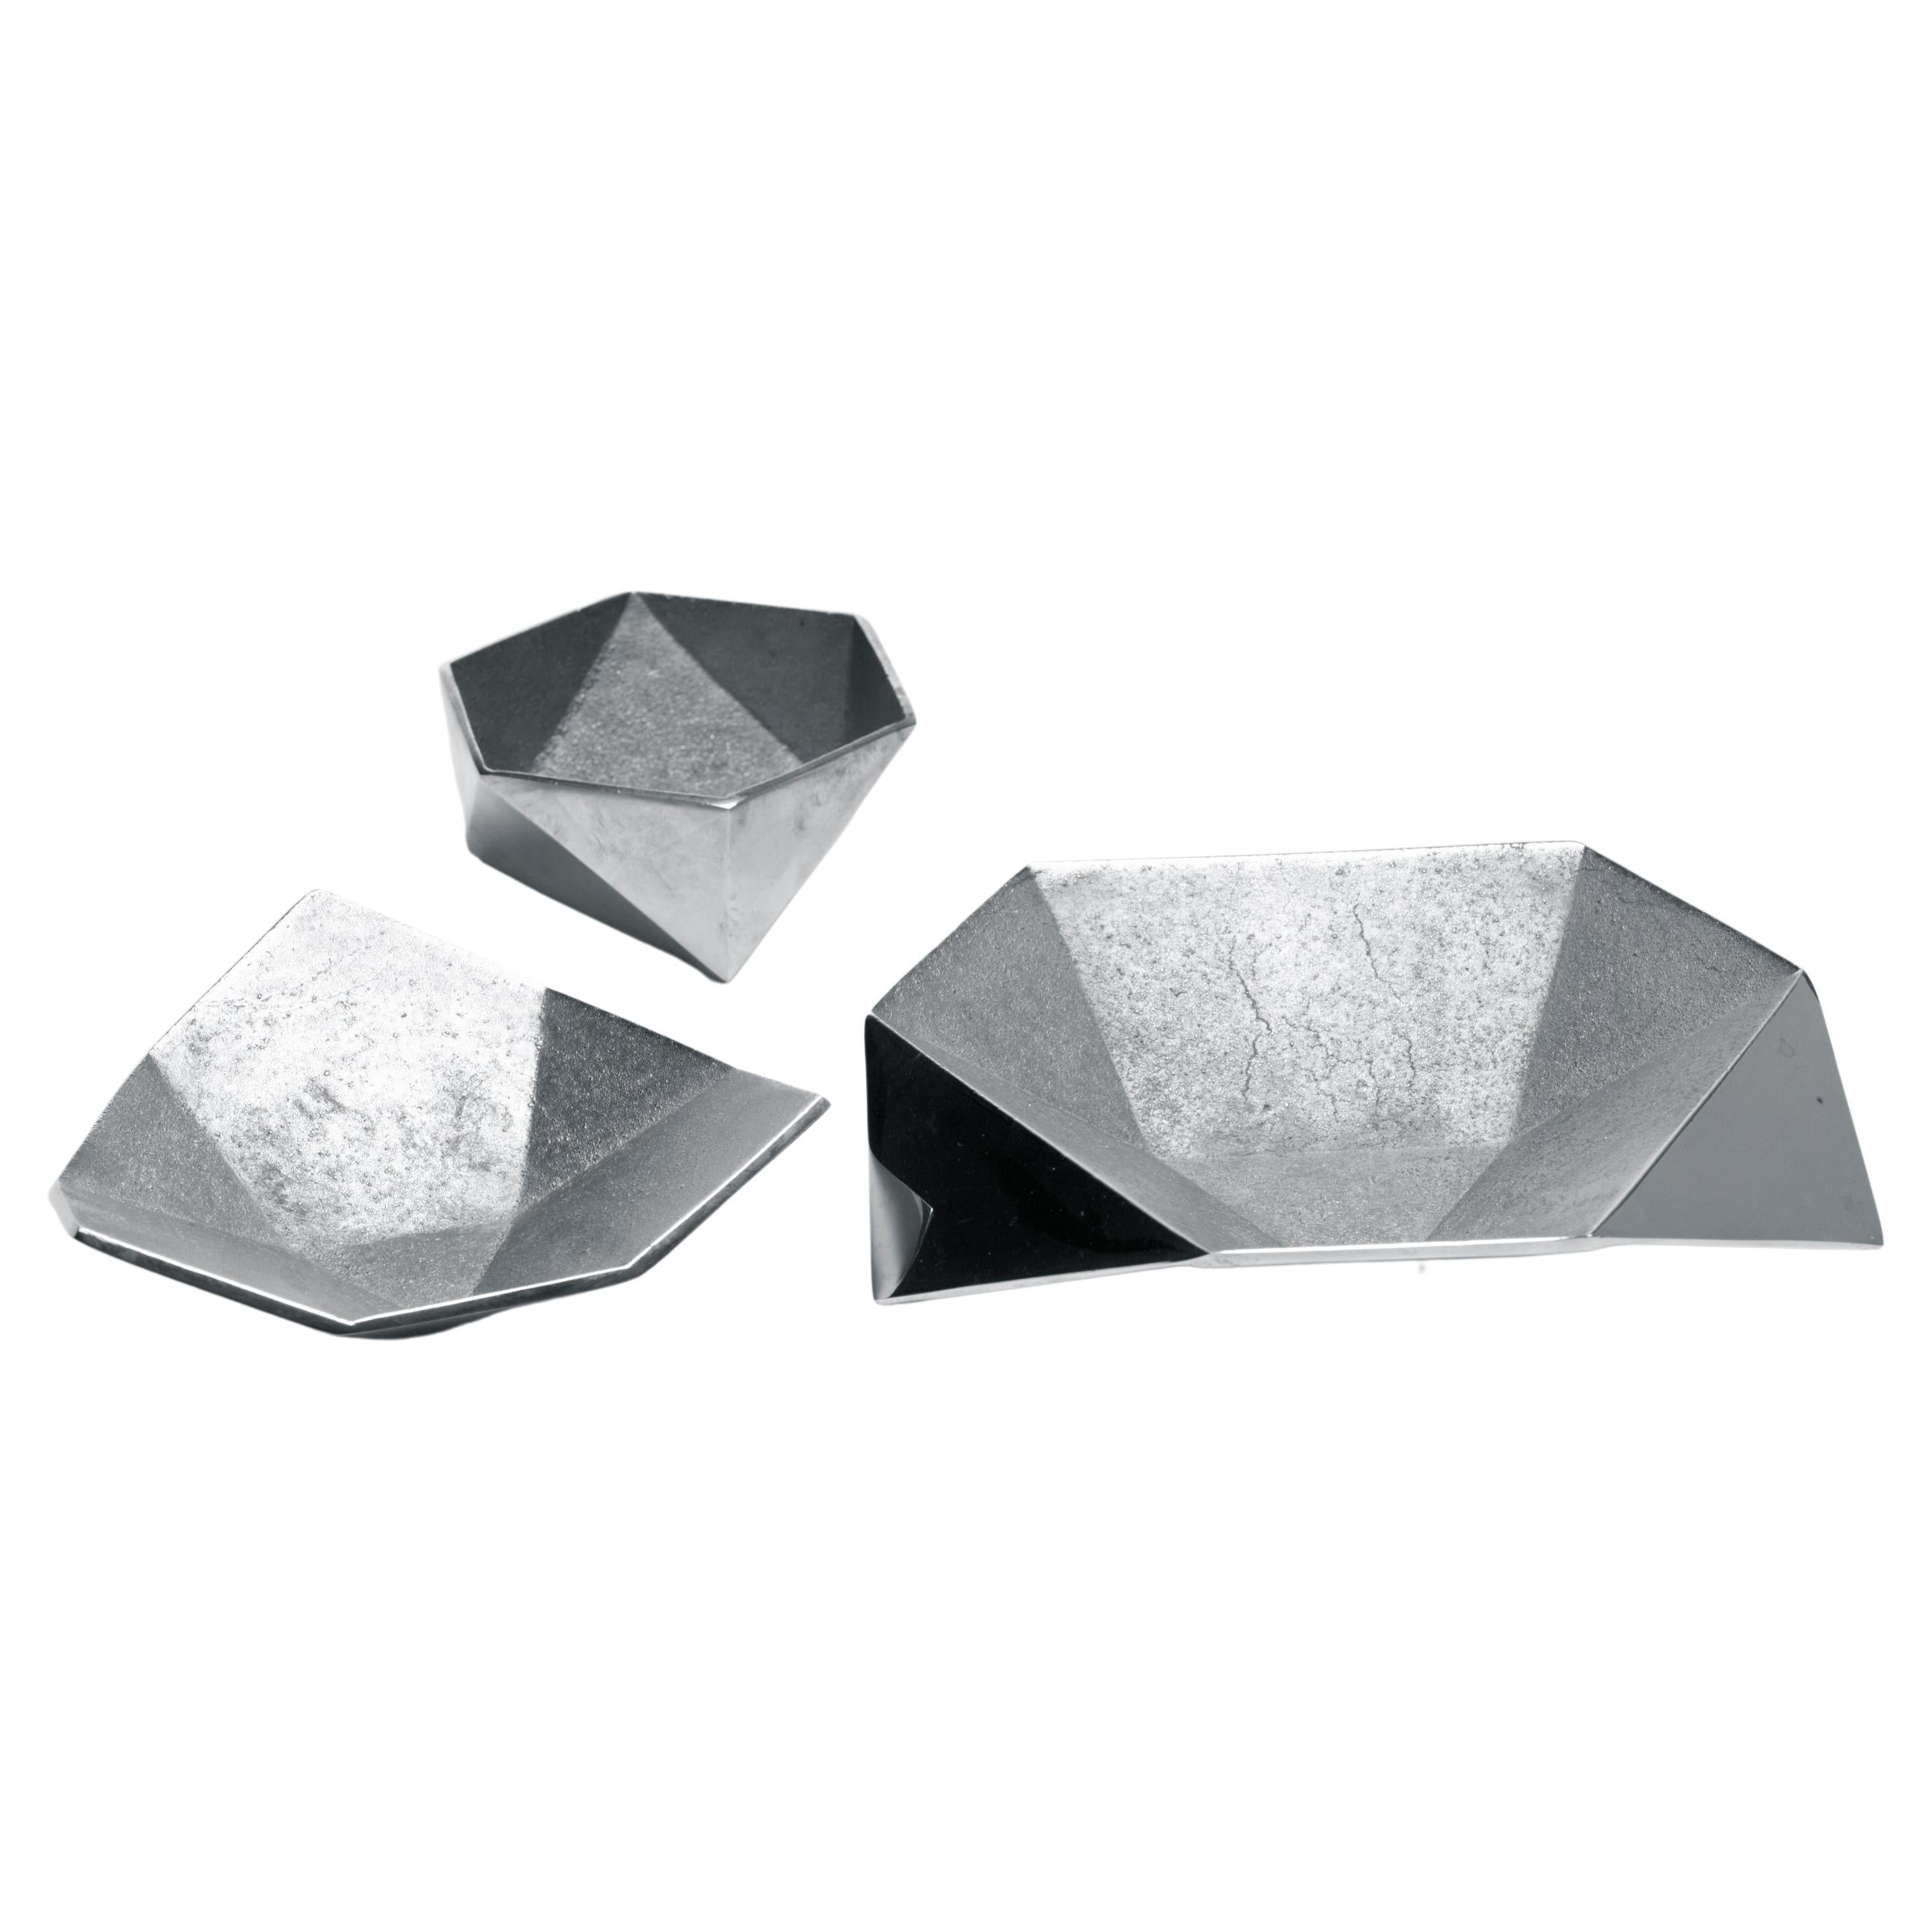 Origami Bowls 'Aluminum' (sold in sets of three)